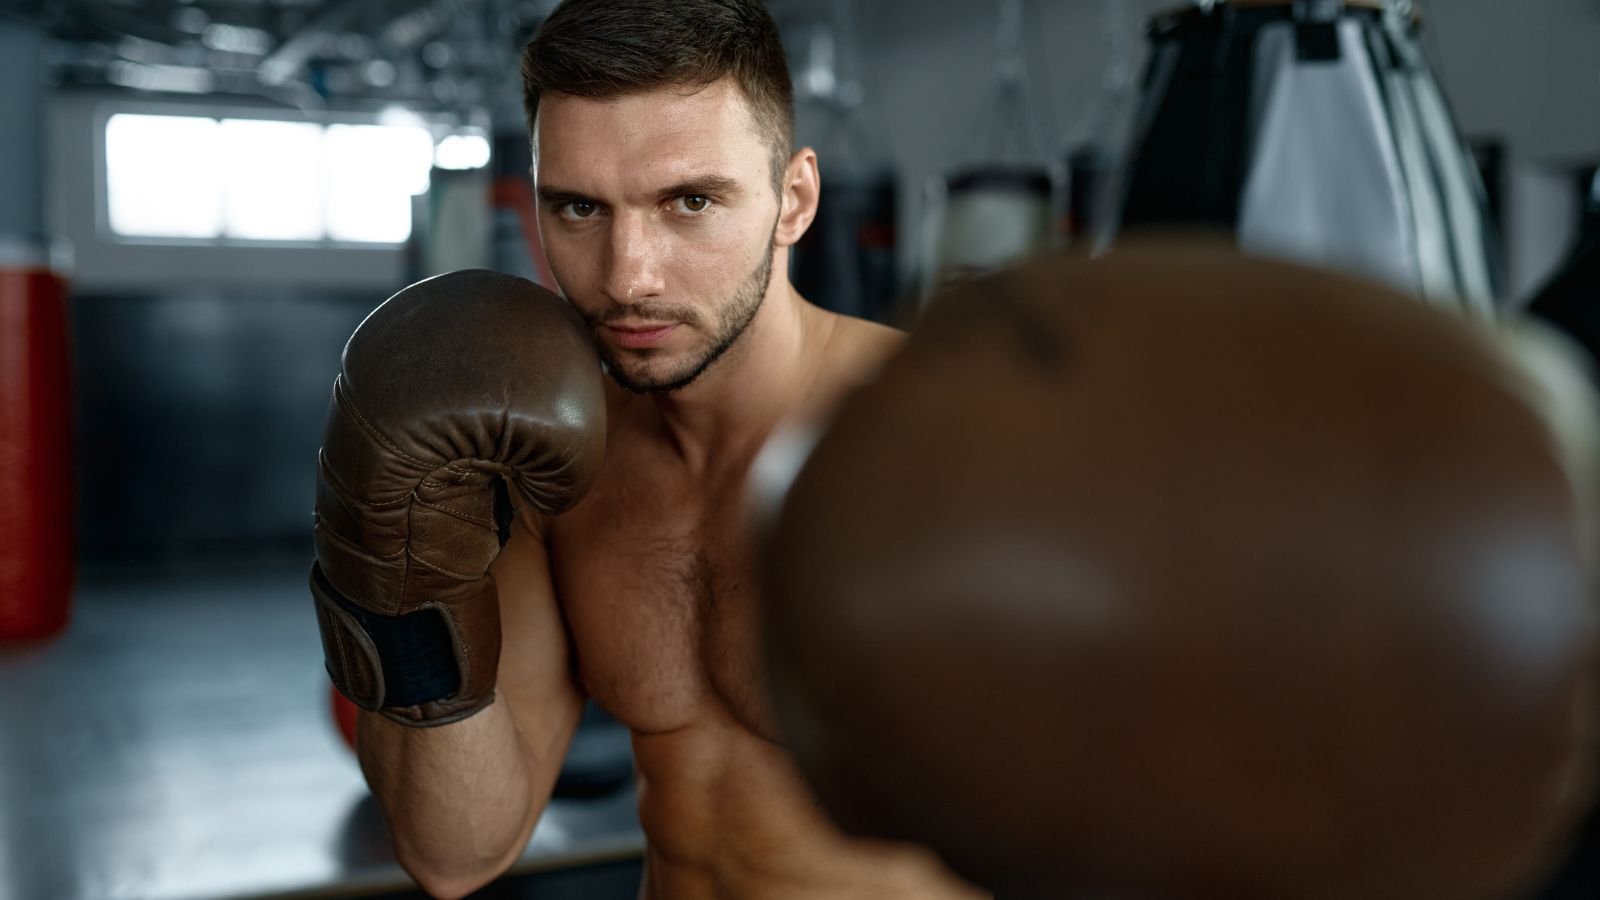 Weight Loss and Muscle Definition - Benefits of Taking Boxing Fitness Classes